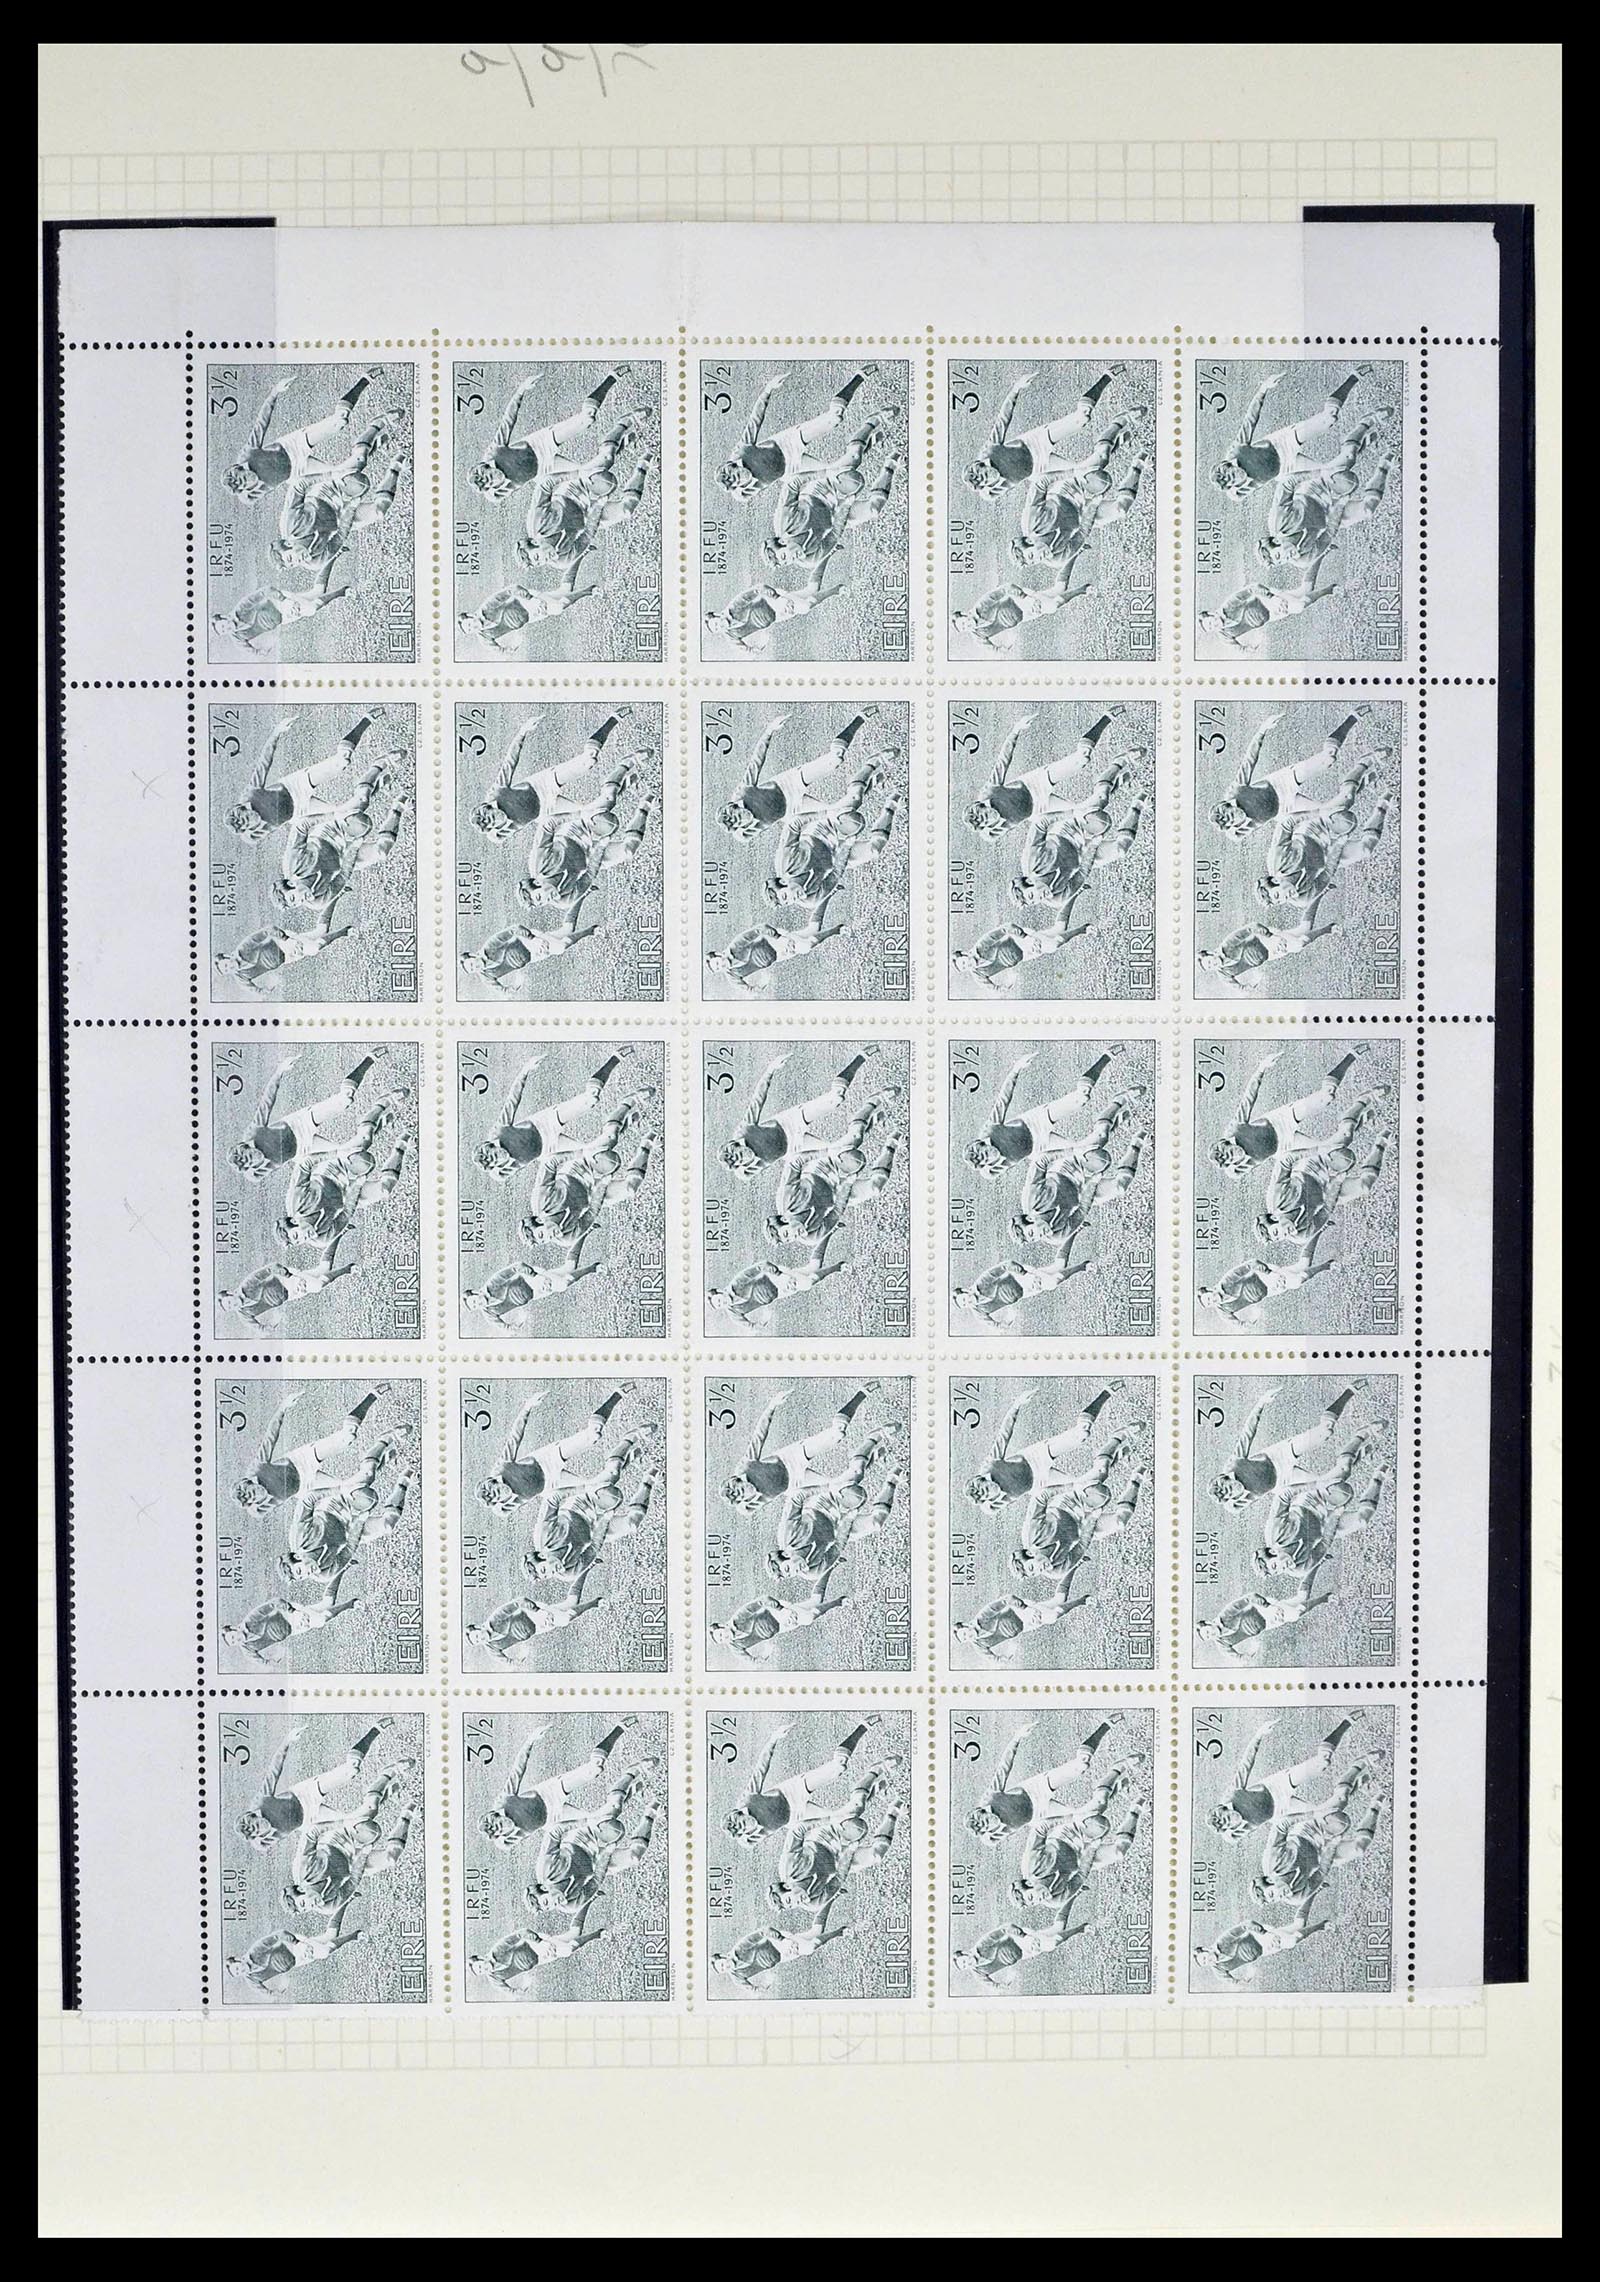 39272 0034 - Stamp collection 39272 Ireland plateflaws and varities 1963-1981.